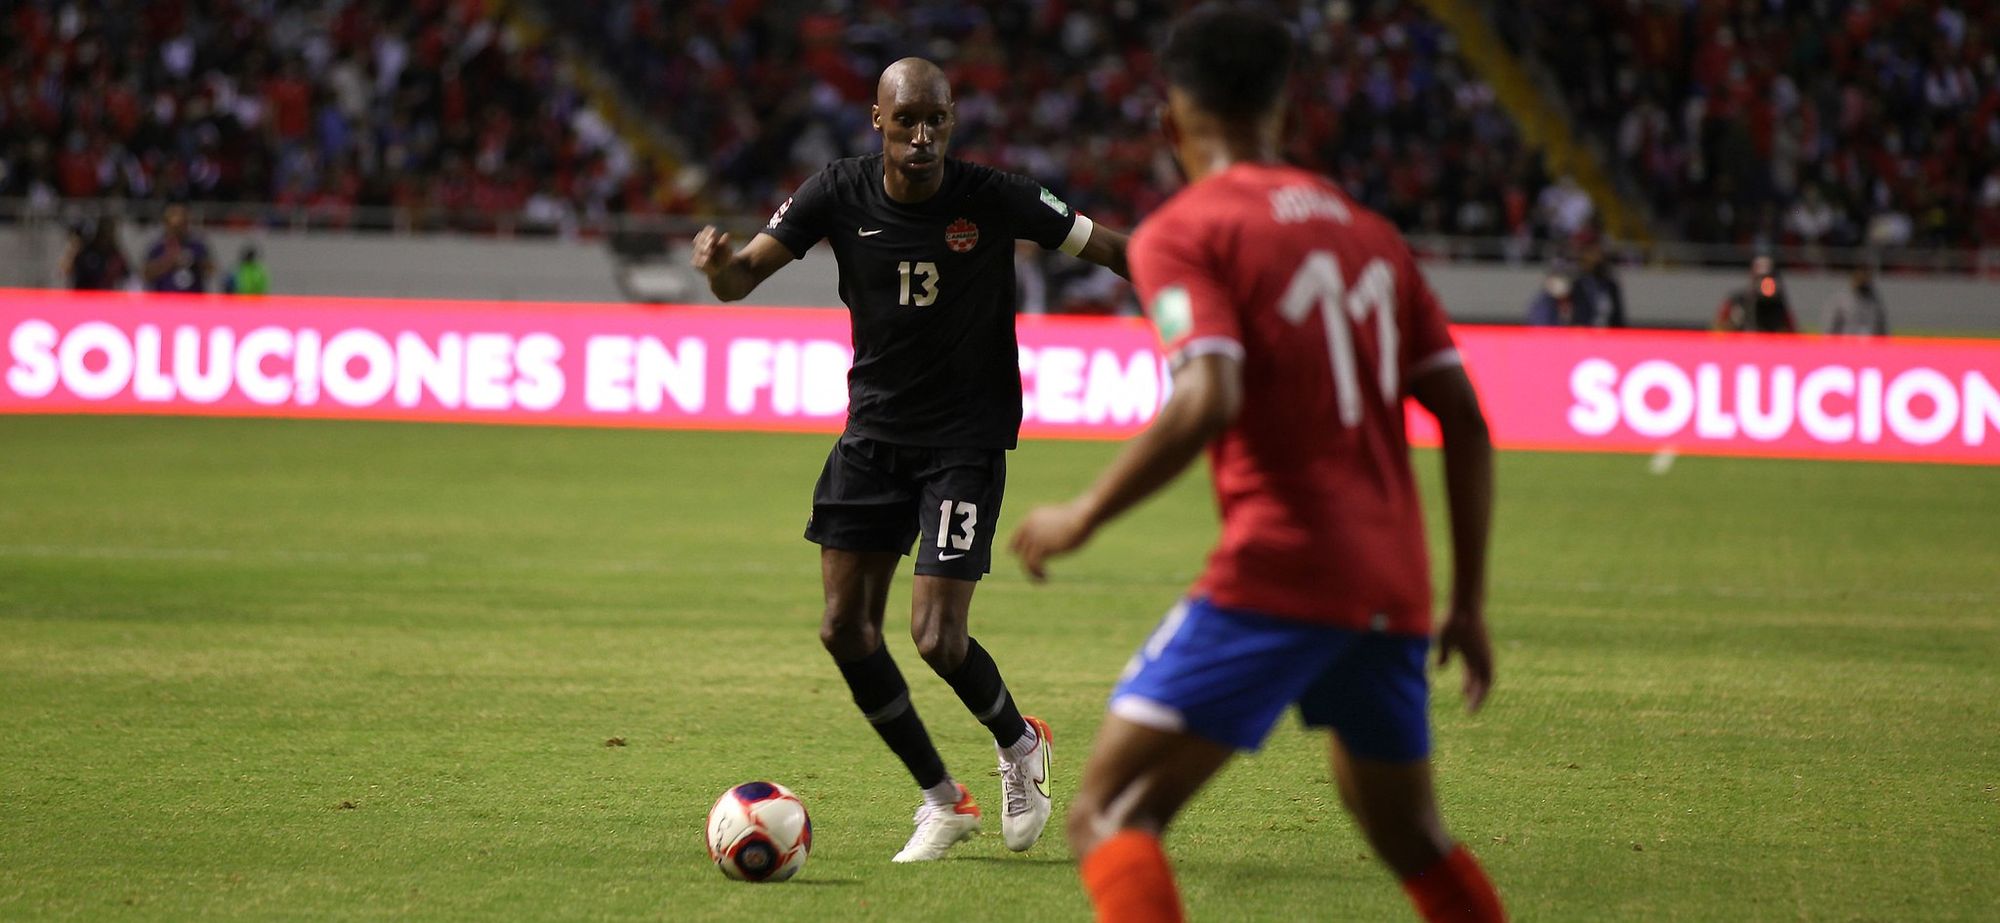 CanMNT Talk: Small bump on the road towards World Cup qualification